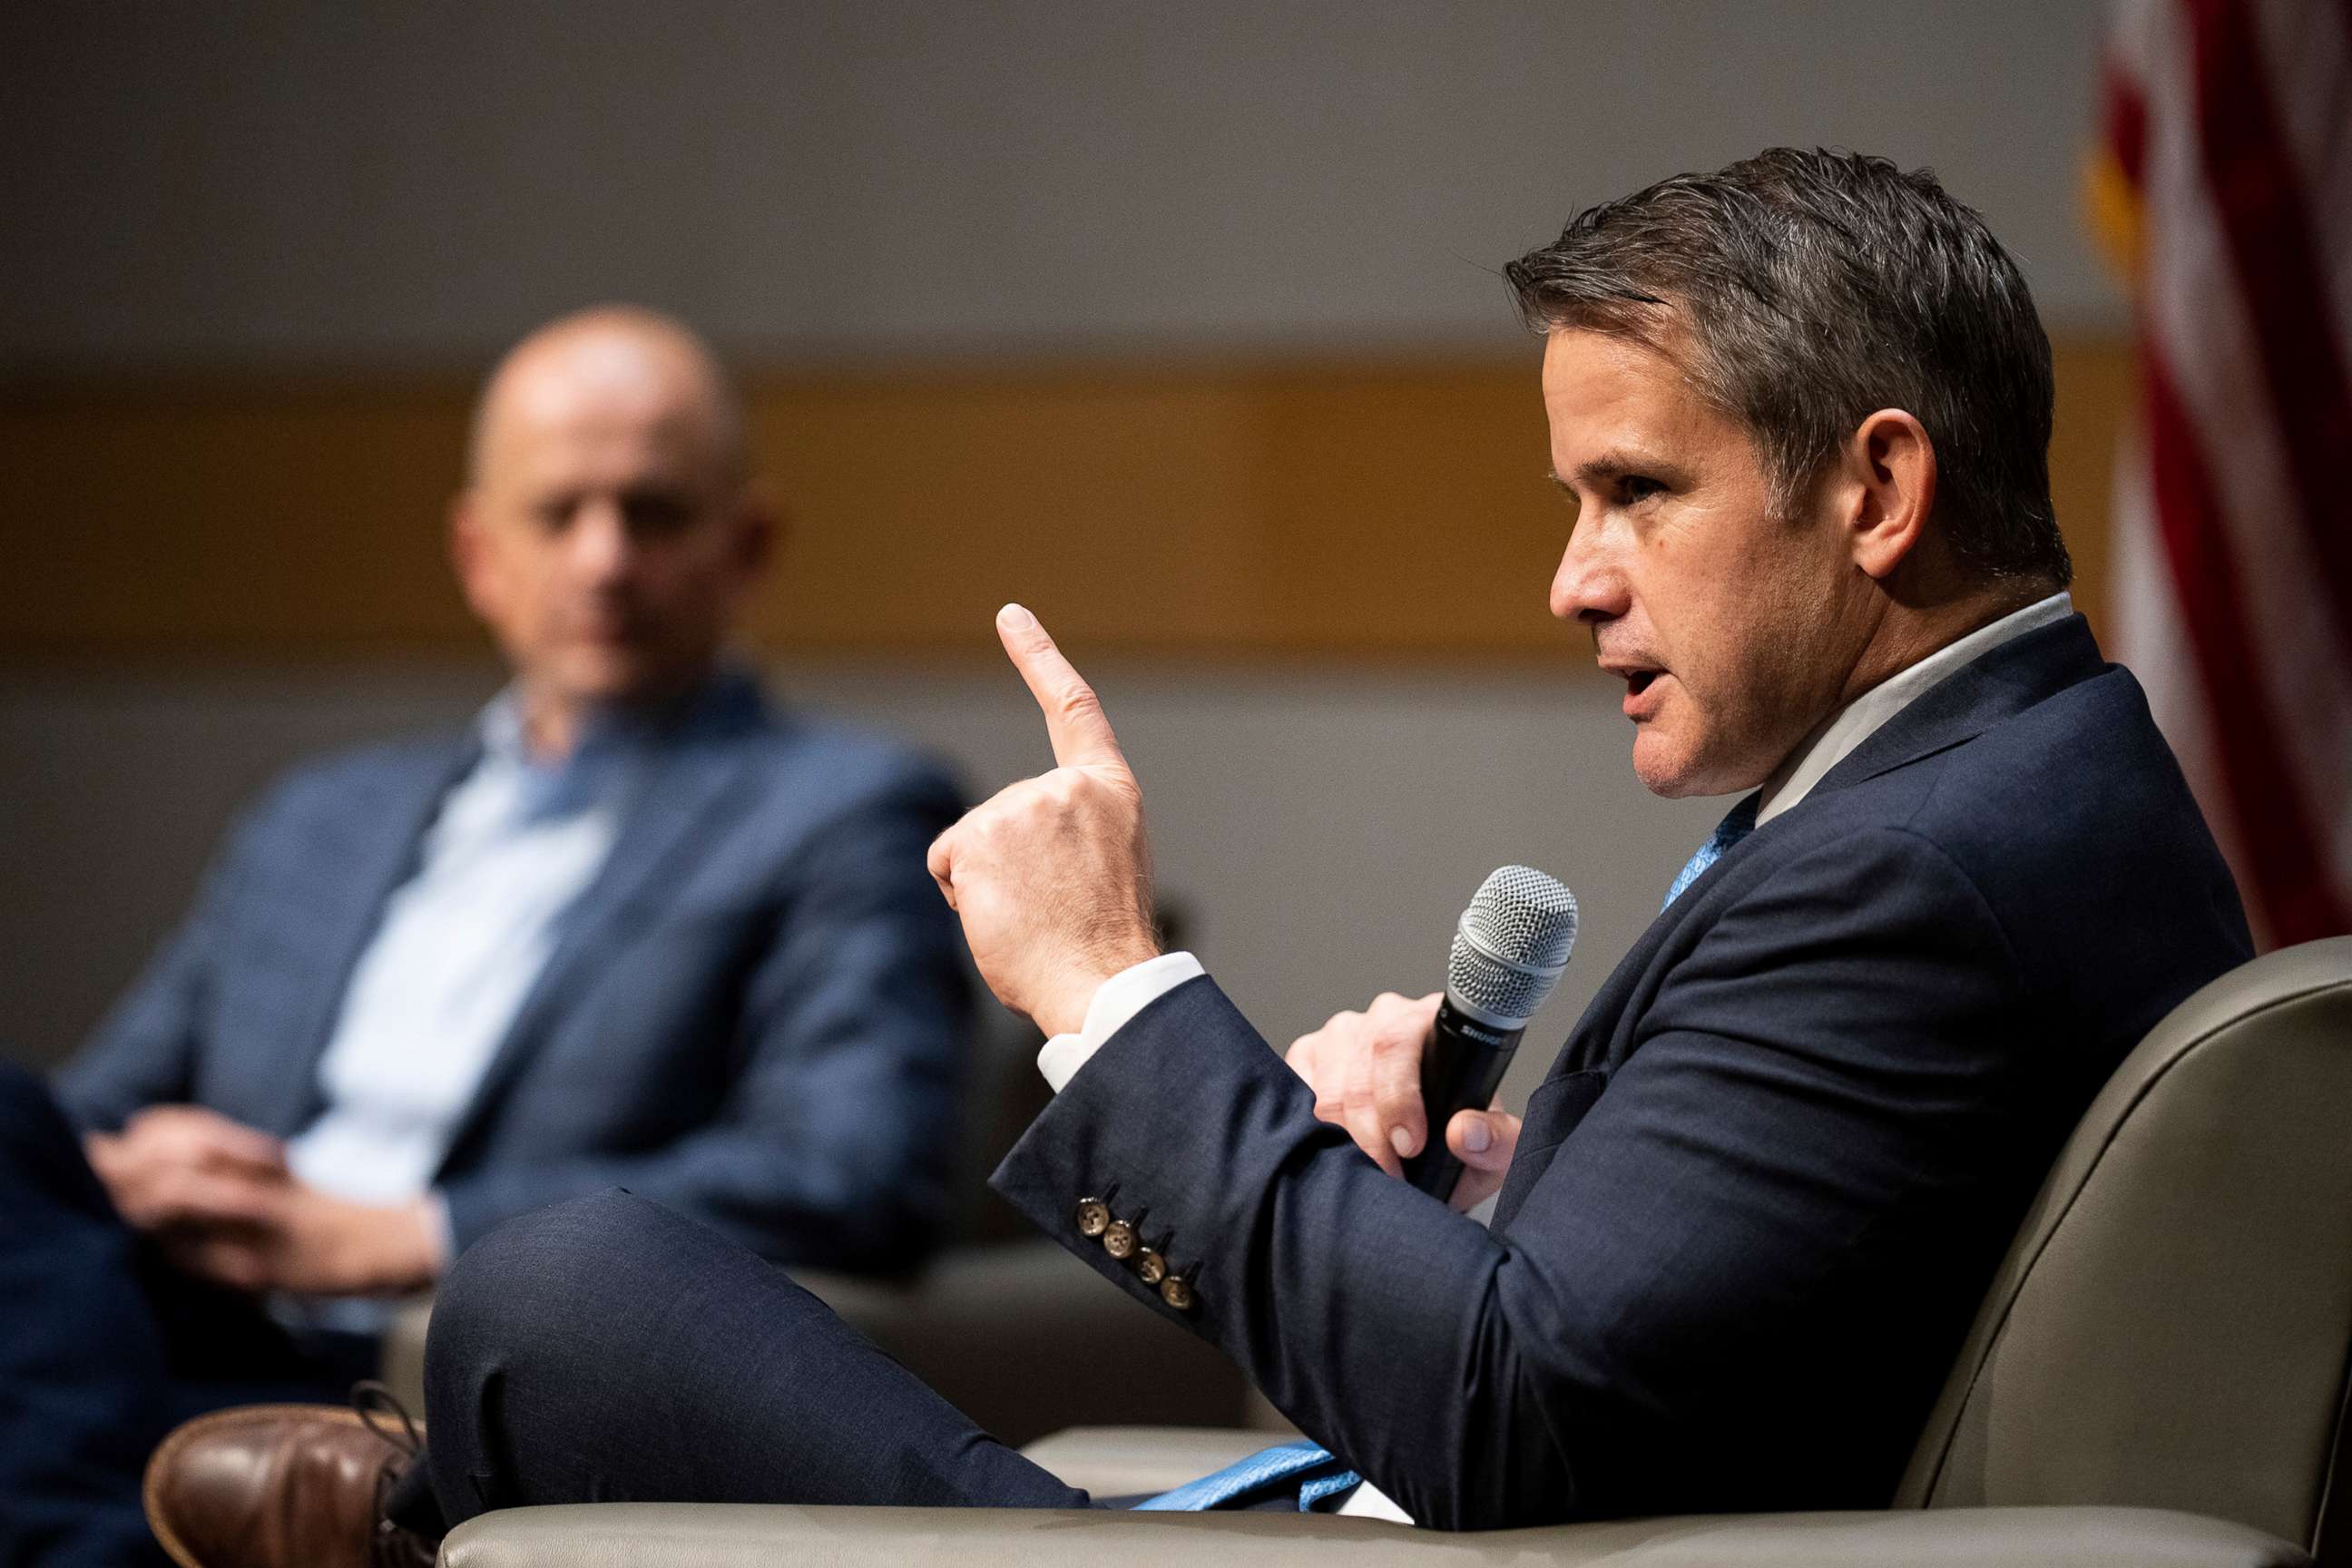 PHOTO: In this Oct. 20, 2022, file photo, Rep. Adam Kinzinger and Utah Senate candidate Evan McMullin hold a discussion on Democracy and the future of the American political system at the Salt Lake City Public Library in Salt Lake City.